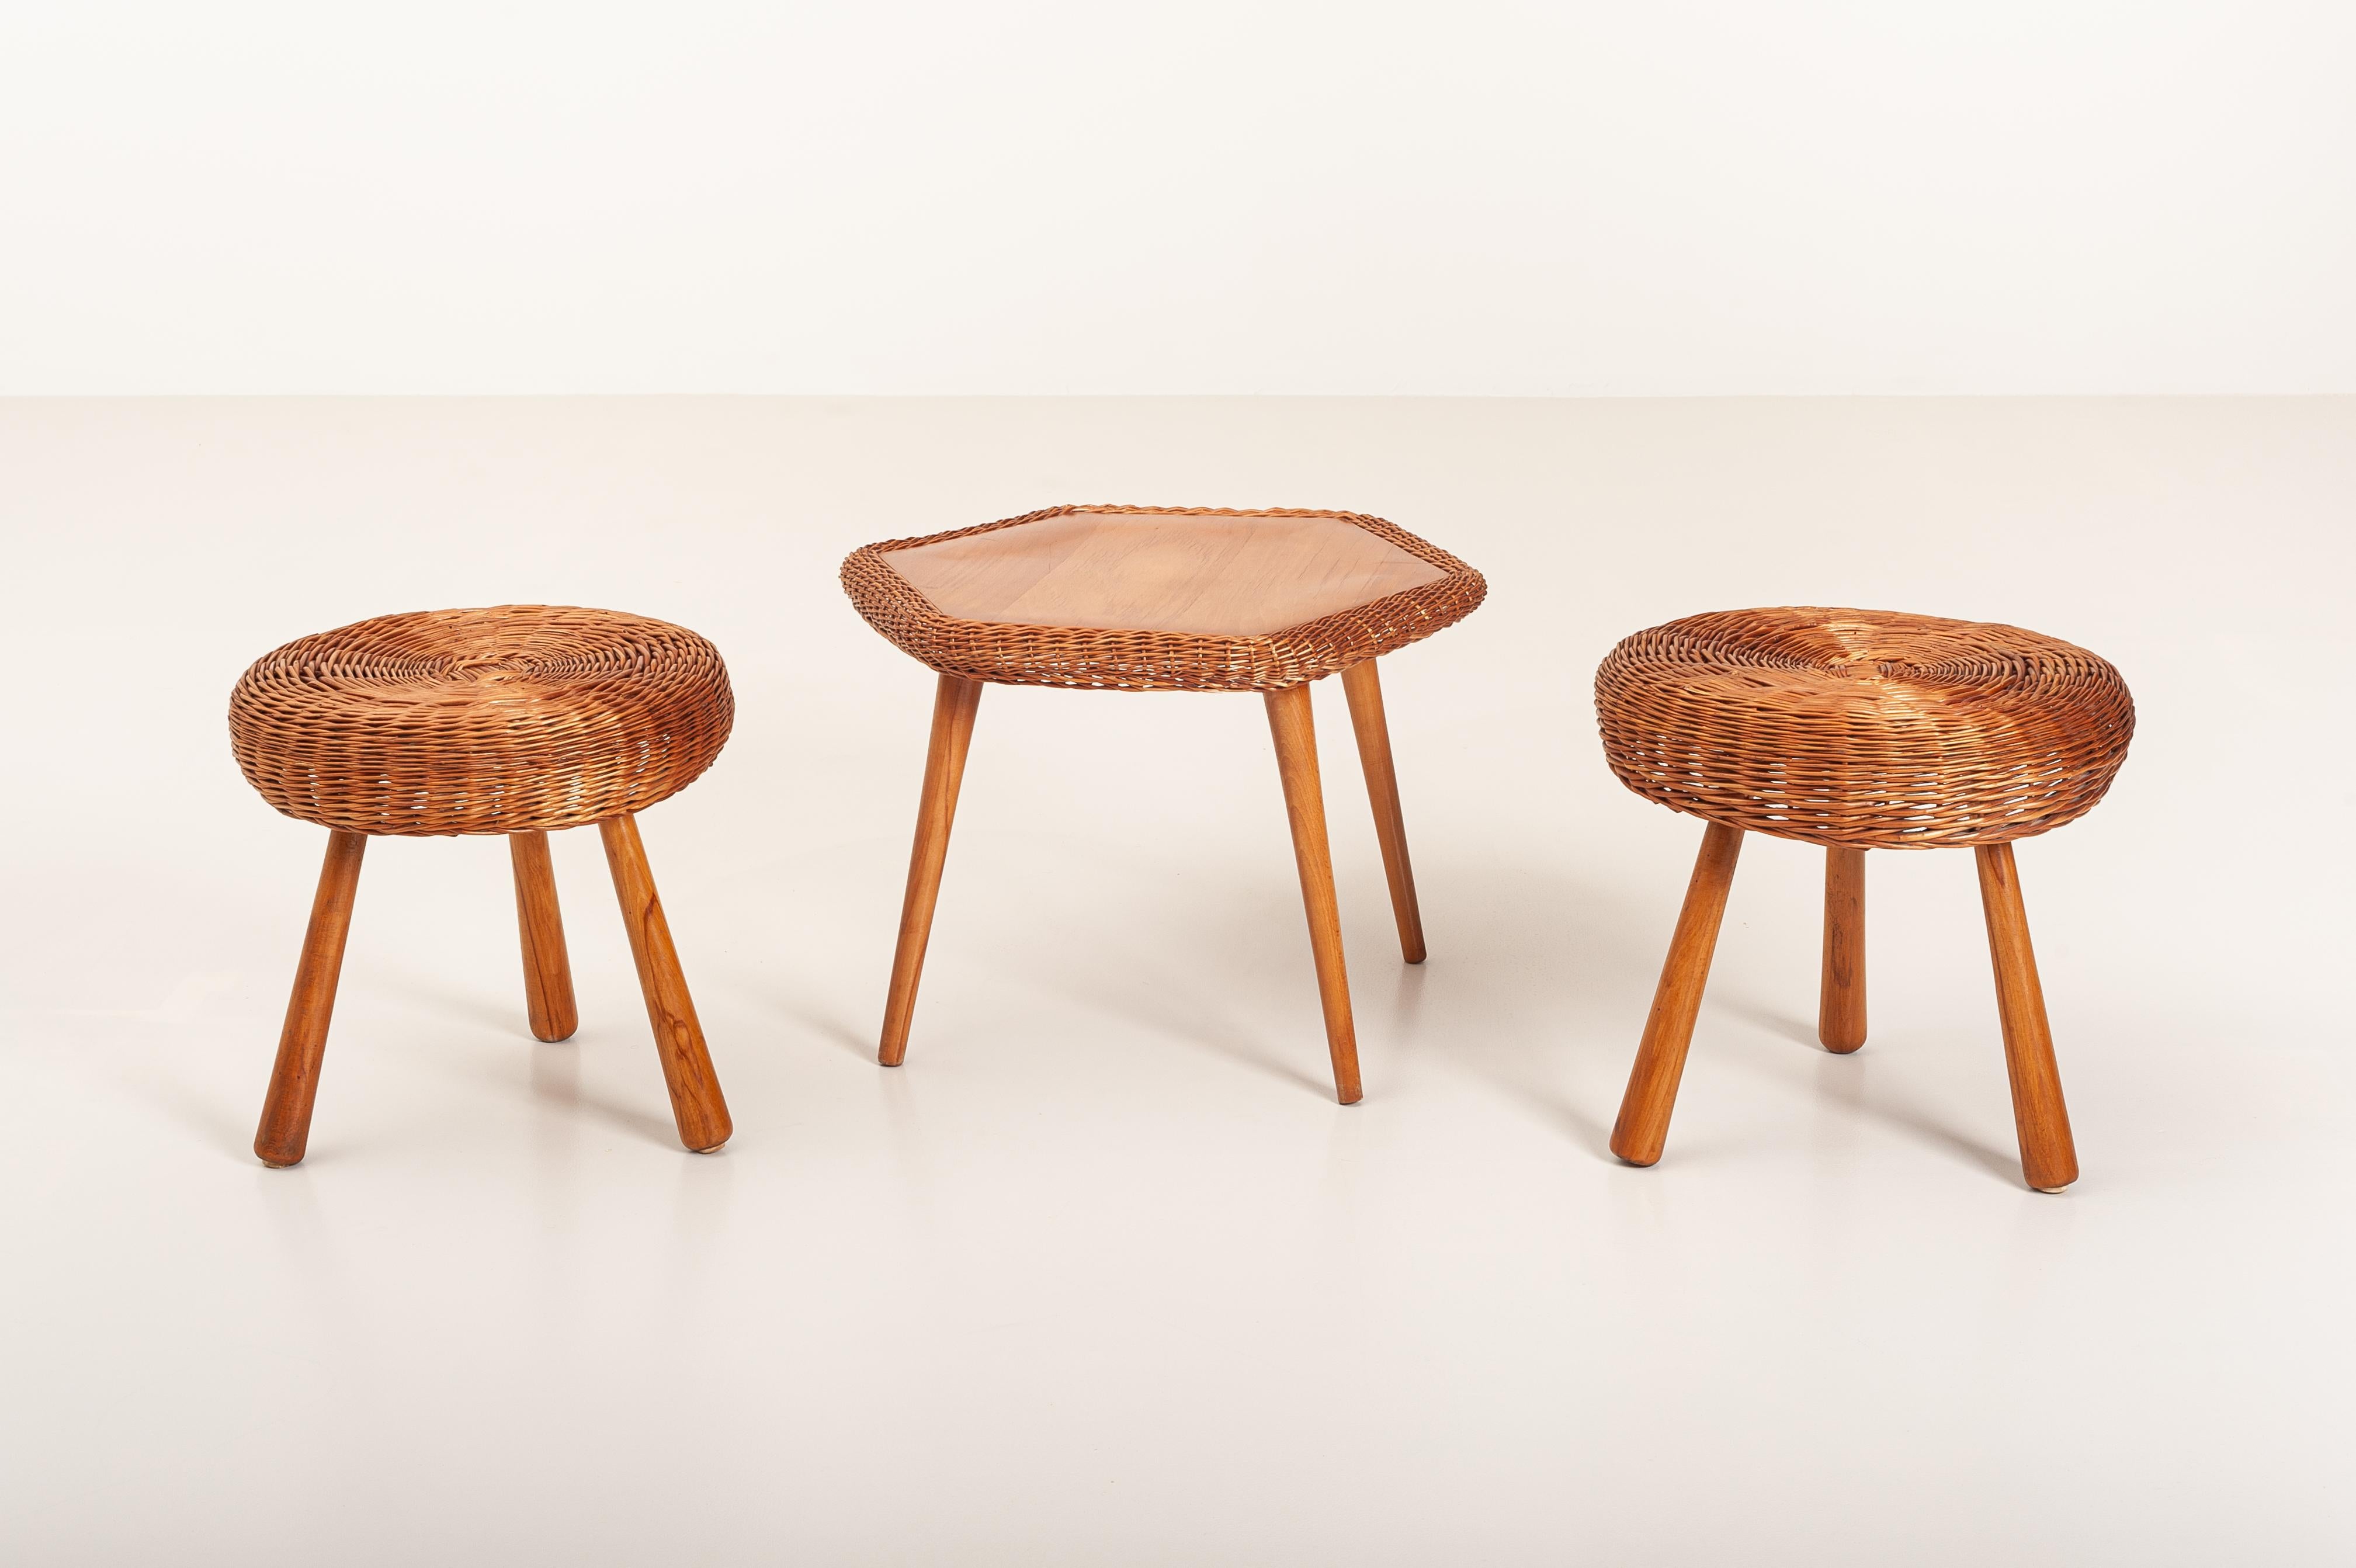 Tony Paul Attributed Stools, Woven Wicker, Solid Beech, United States, 1950s For Sale 4